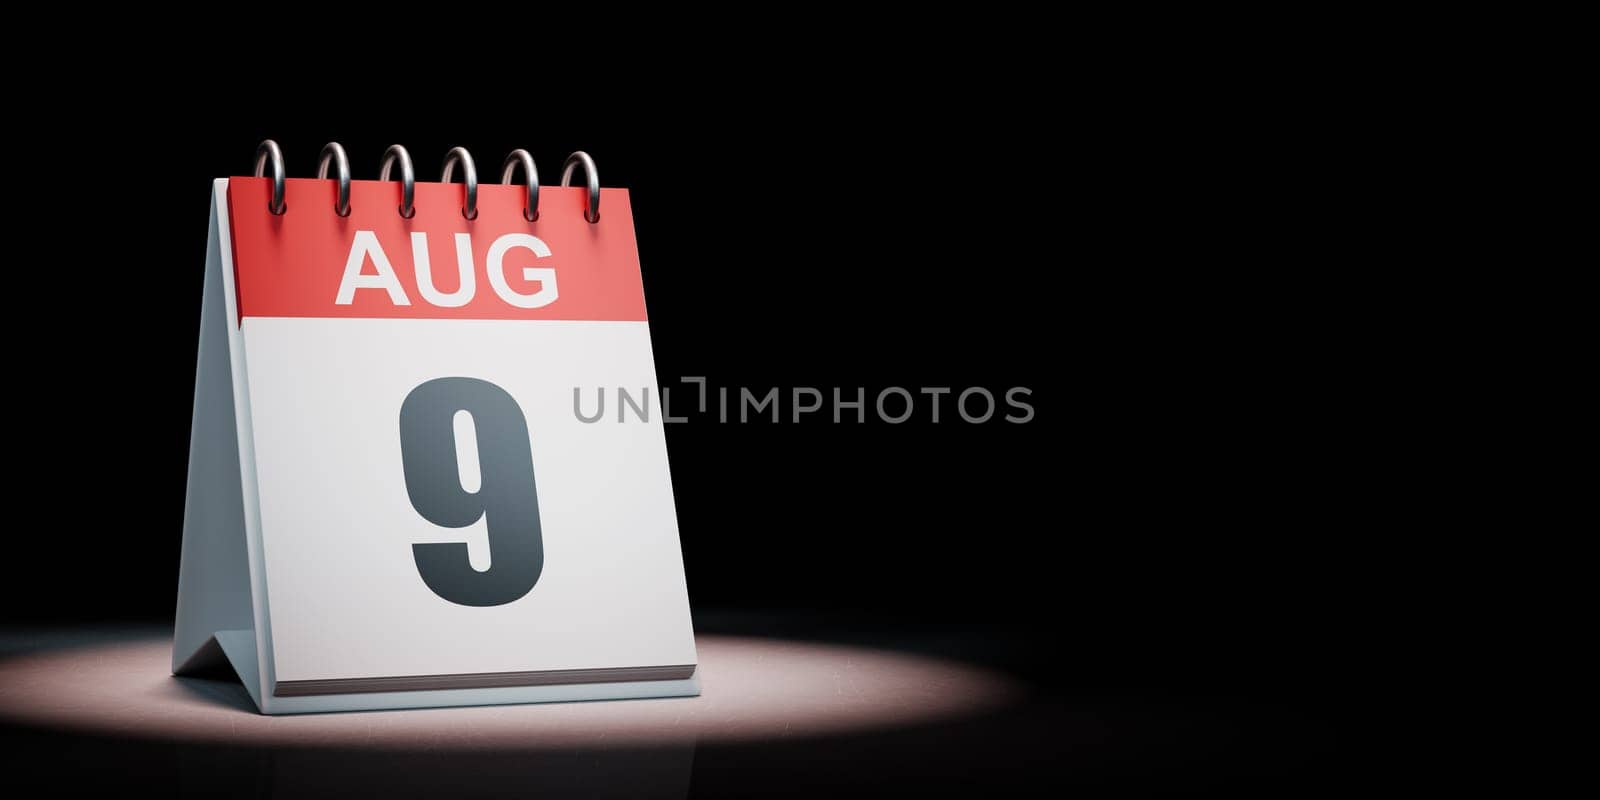 Red and White August 9 Desk Calendar Spotlighted on Black Background with Copy Space 3D Illustration